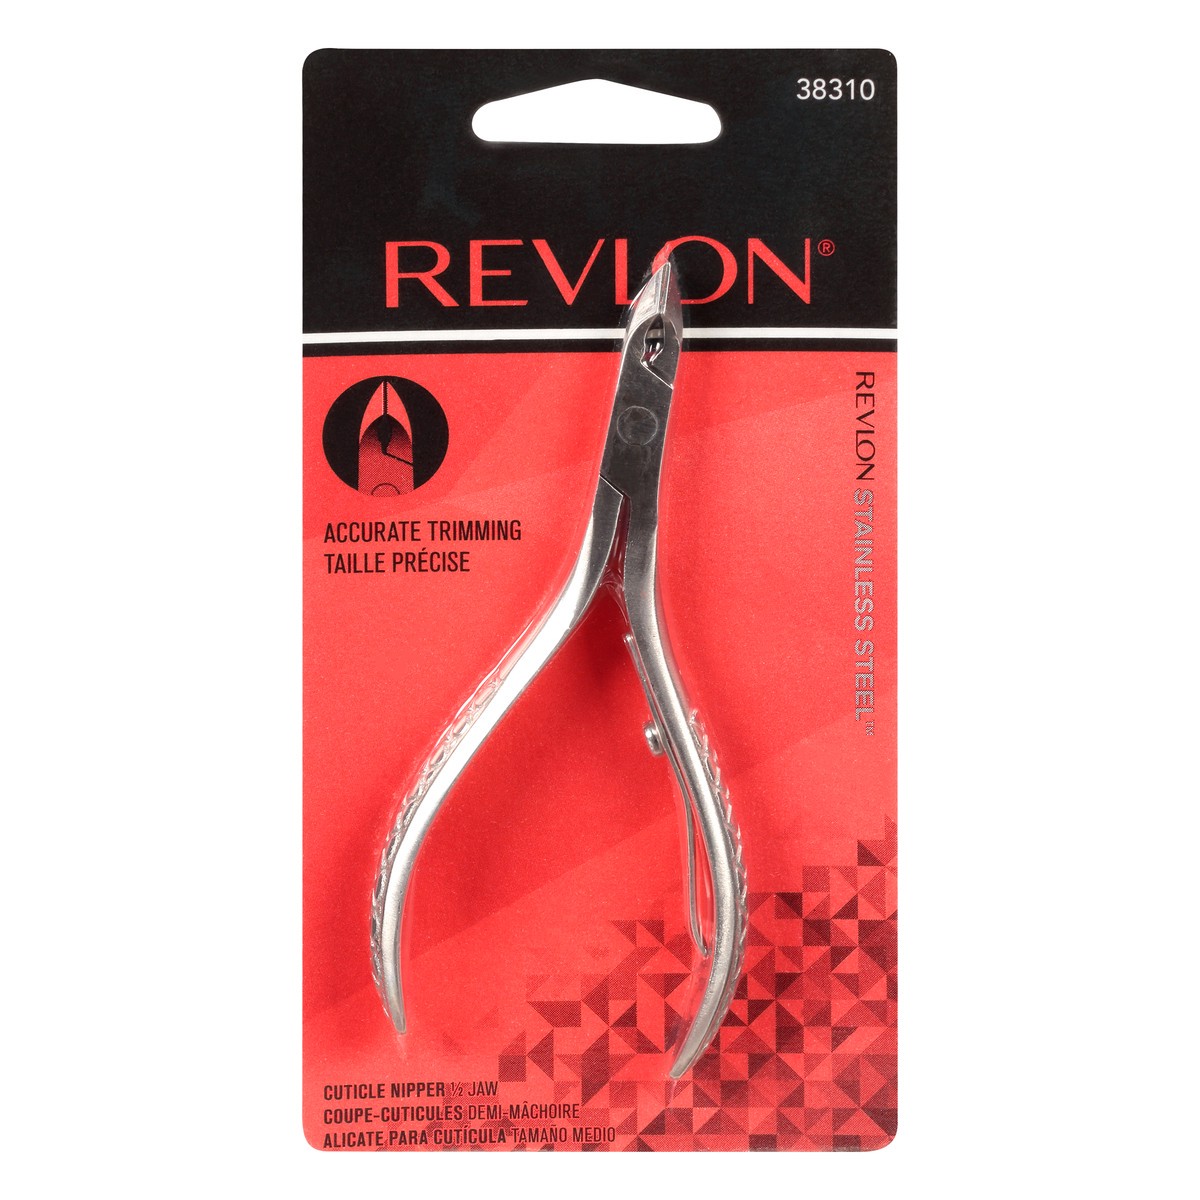 slide 1 of 9, Revlon Accurate Trimming 1/2 Jaw Cuticle Nipper 1 ea, 1 ct